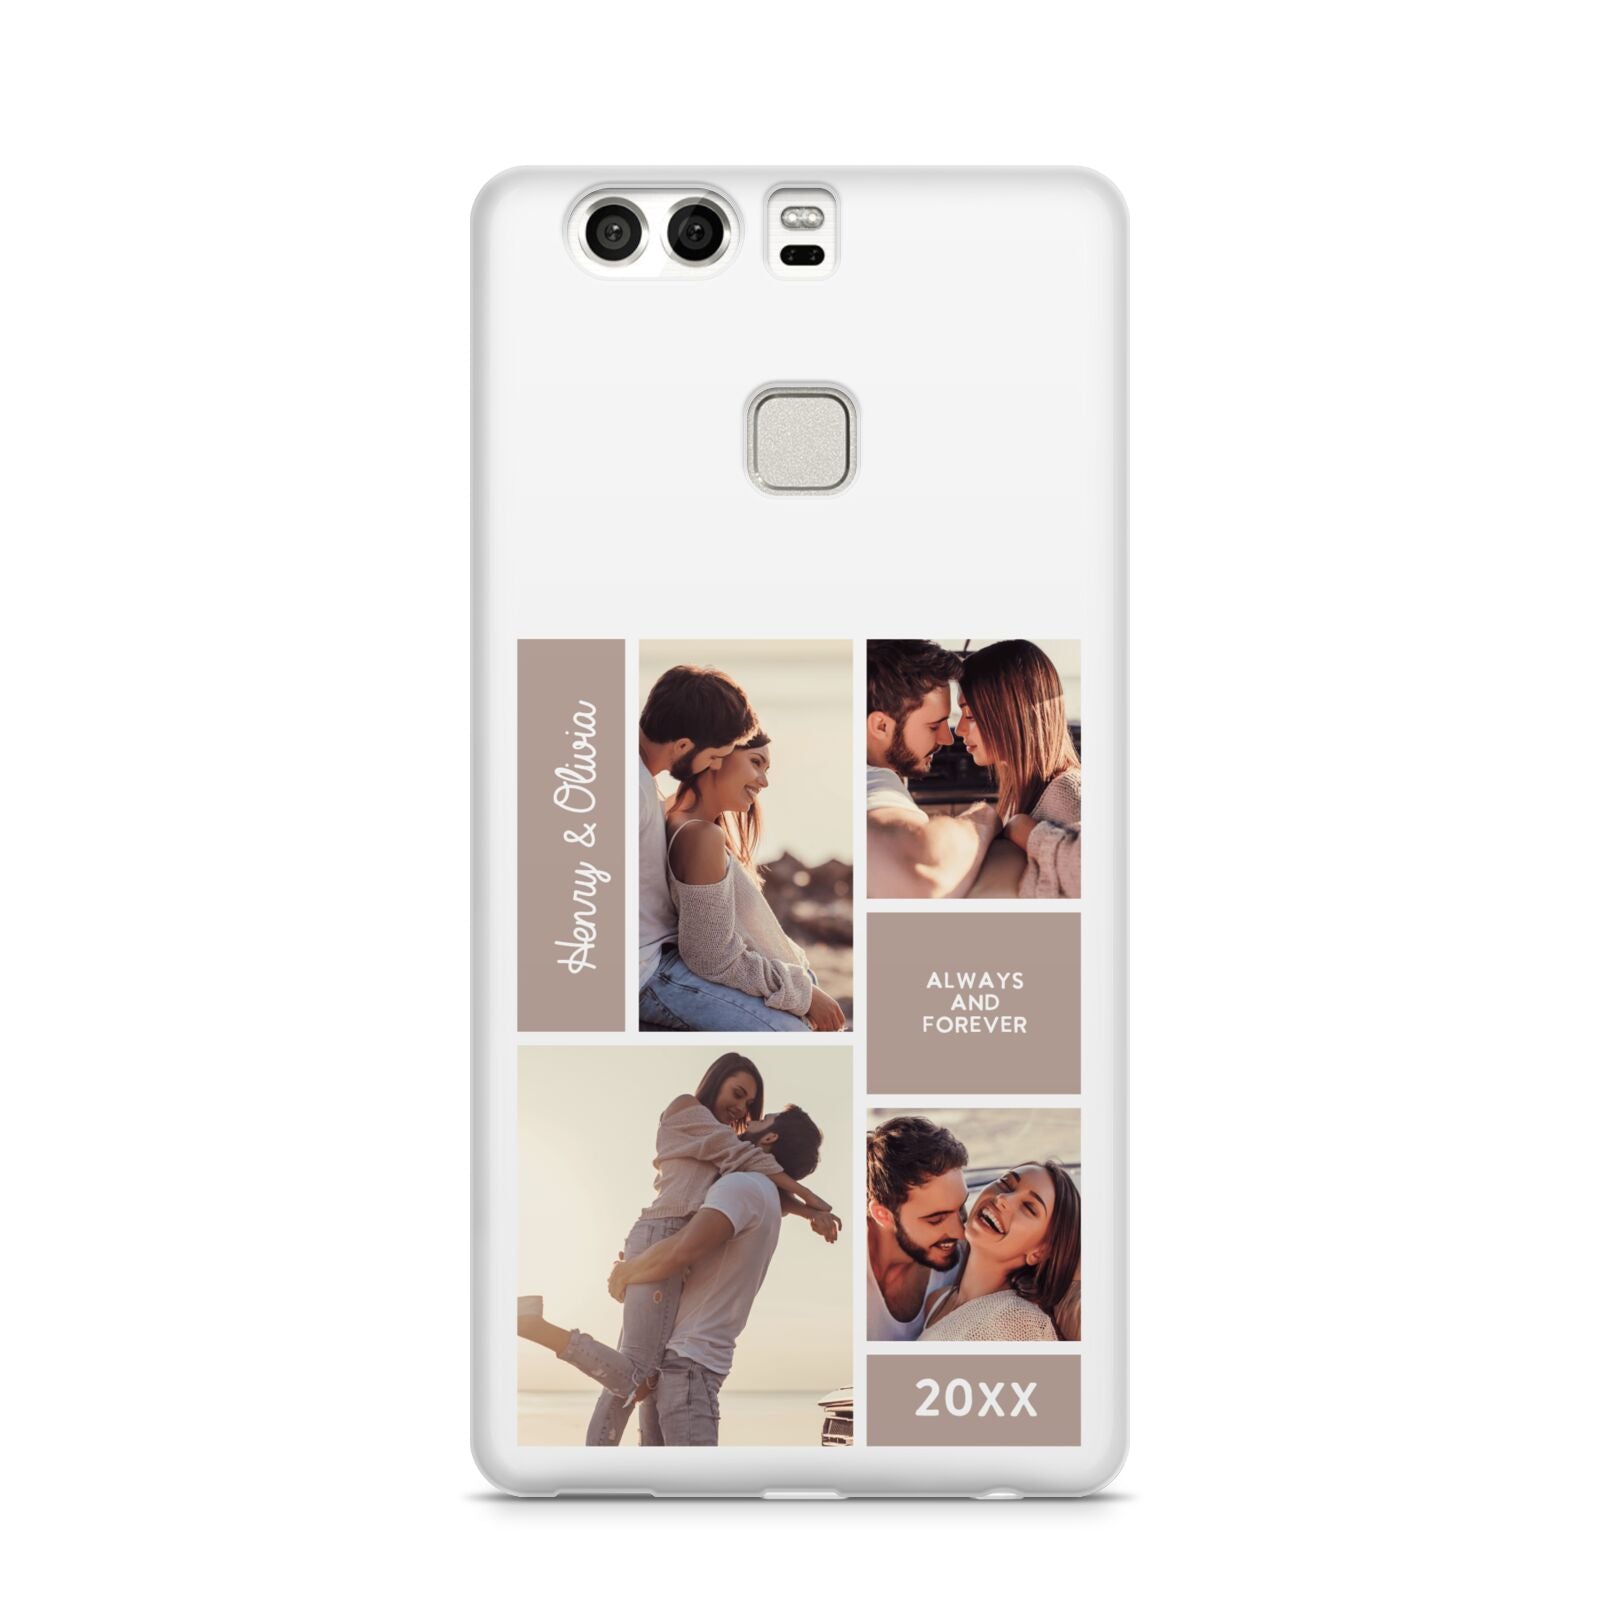 Couples Valentine Photo Collage Personalised Huawei P9 Case